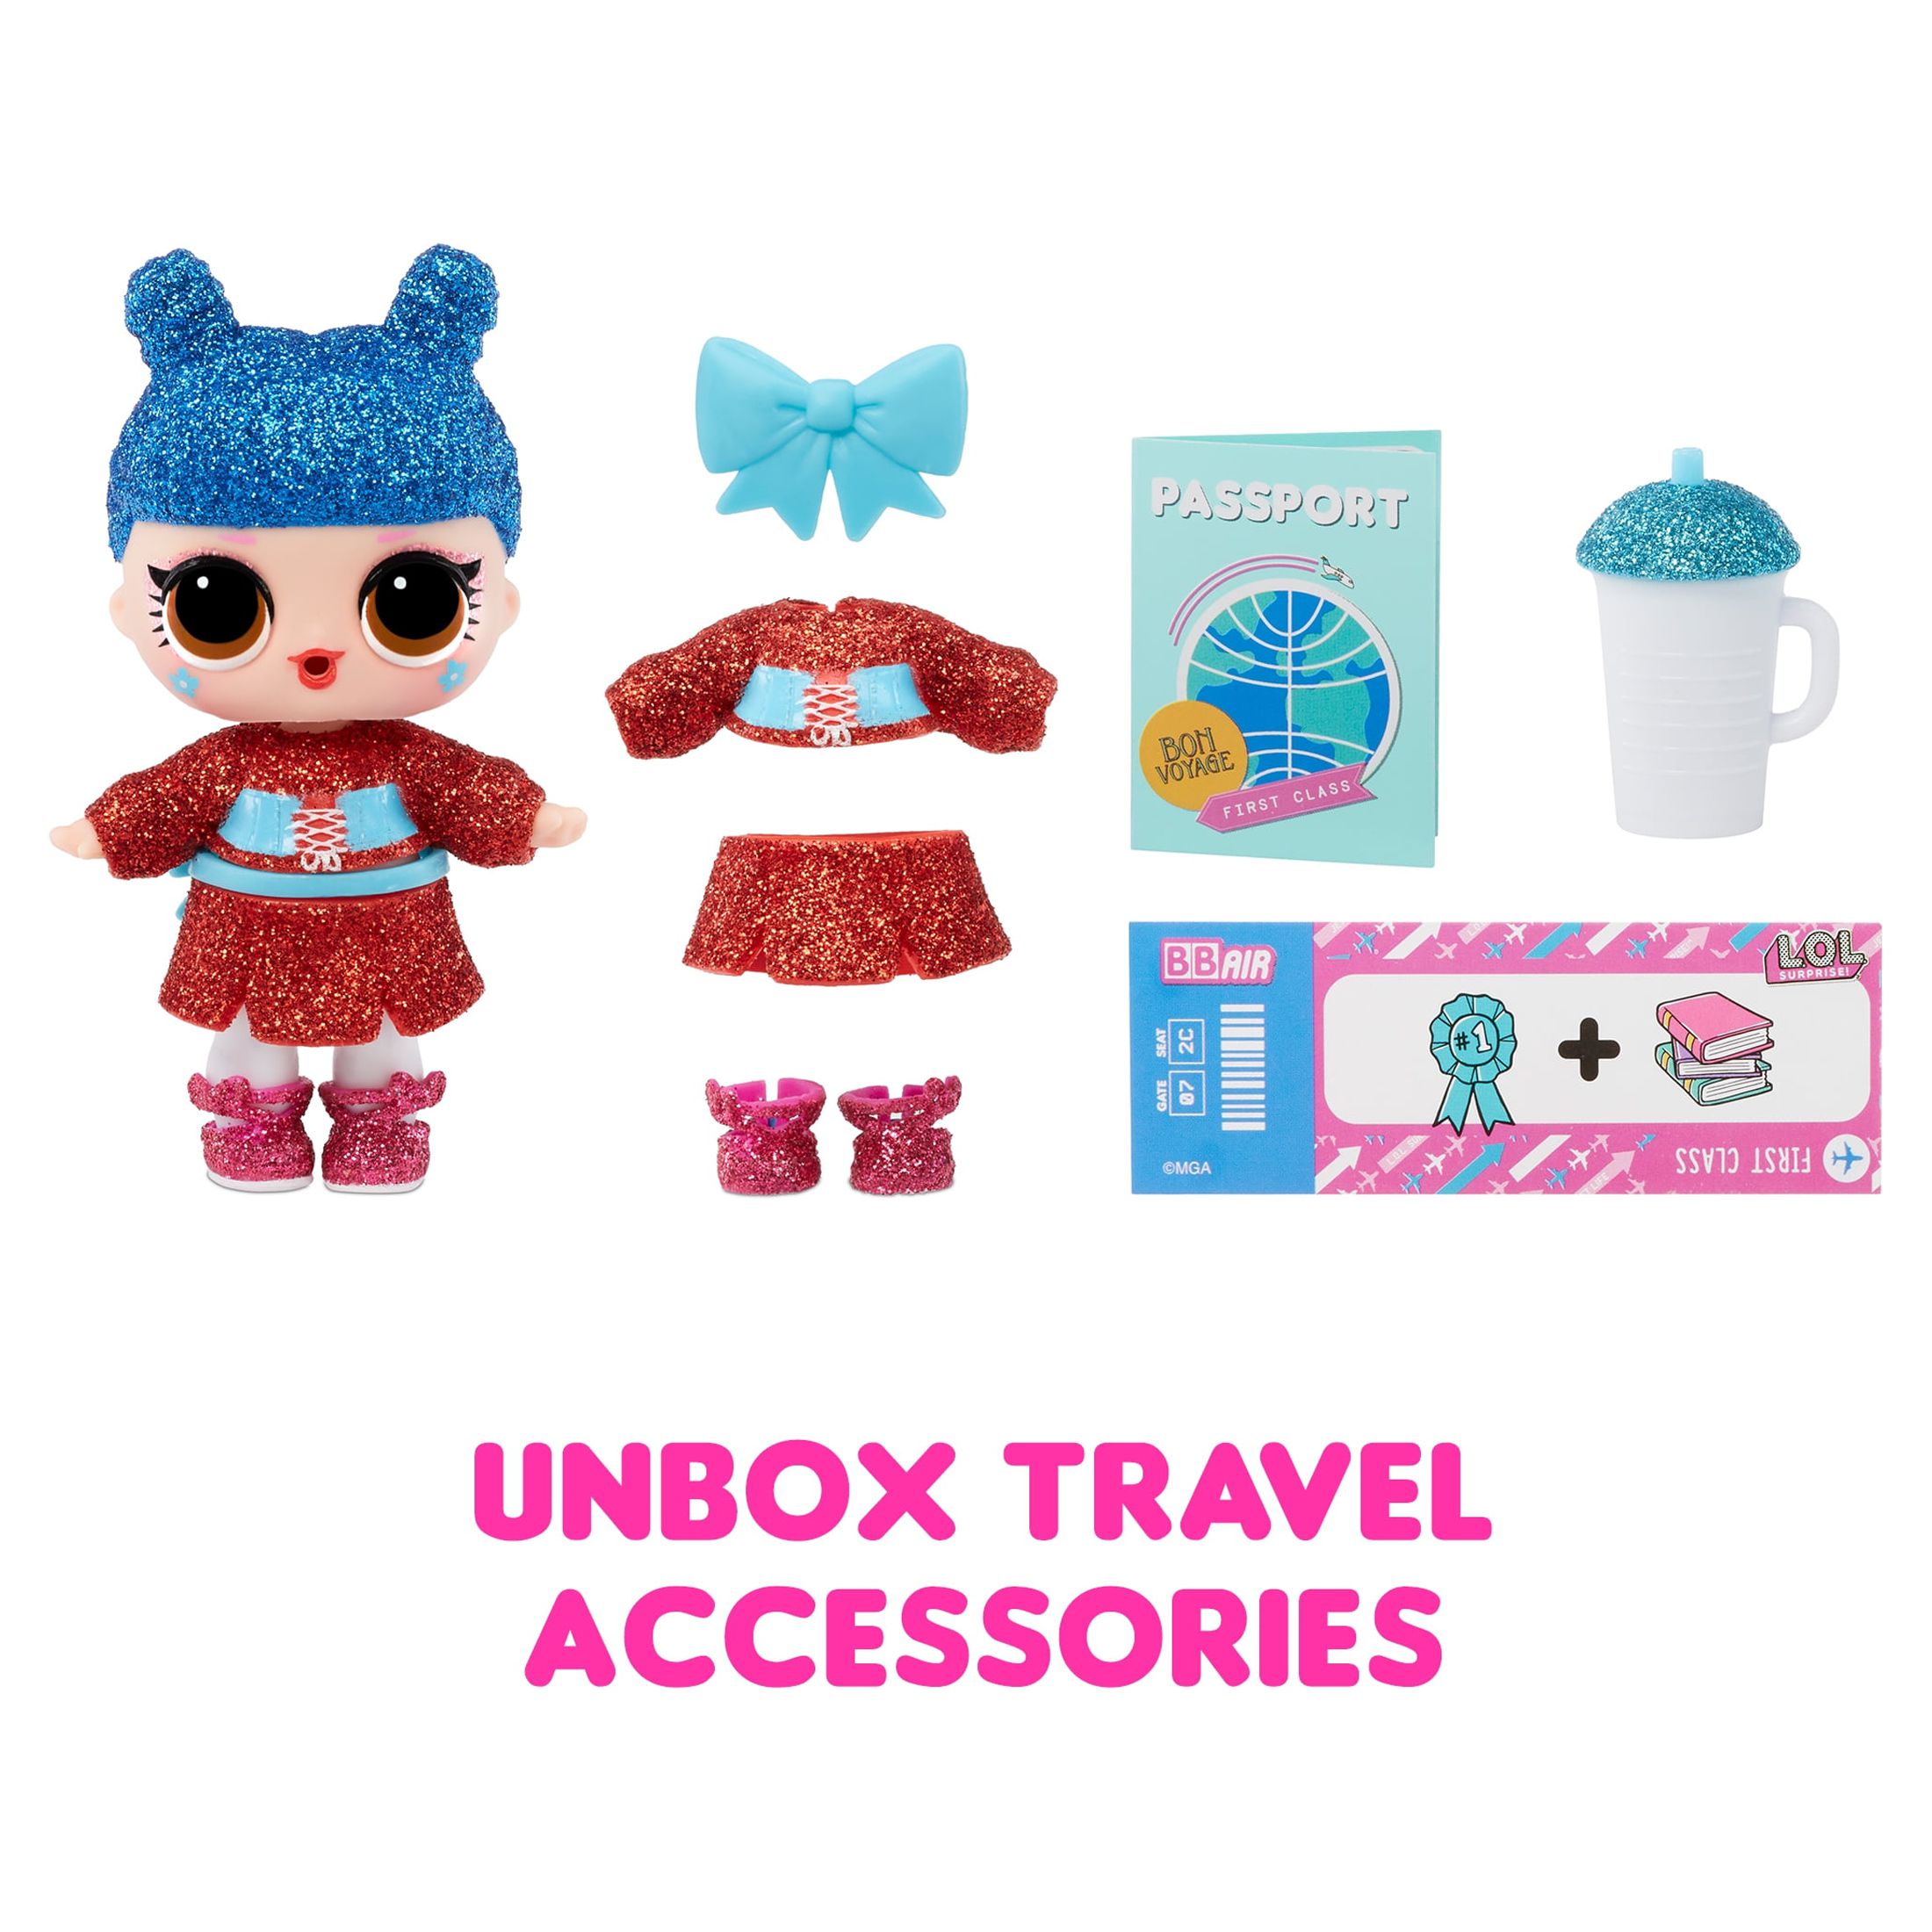 LOL Surprise World Travel™ Dolls with 8 Surprises Including Doll, Fashions, and Travel Themed Accessories - Great Gift for Girls Age 4+ - image 3 of 7